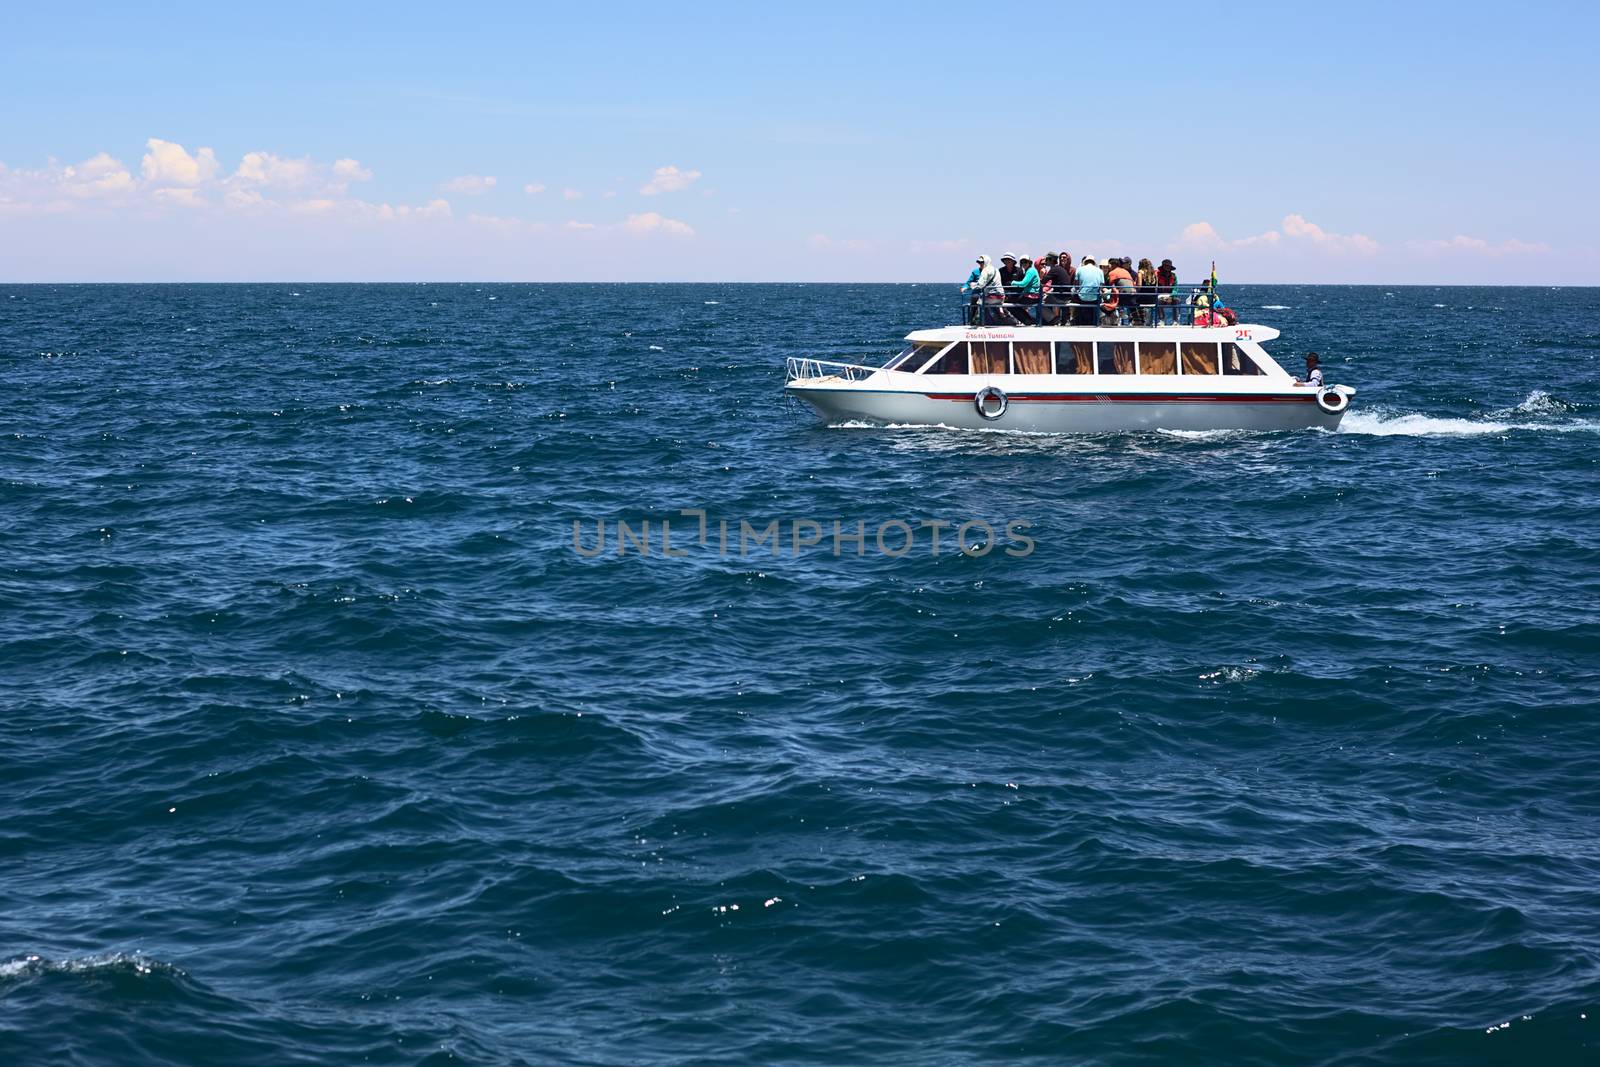 COPACABANA, BOLIVIA - OCTOBER 17, 2014: Tour boat full of tourists on Lake Titicaca on October 17, 2014 close to the tourist town of Copacabana, Bolivia. Such tour boats transport people from Copacabana to Isla del Sol (Sun Island) and back. 